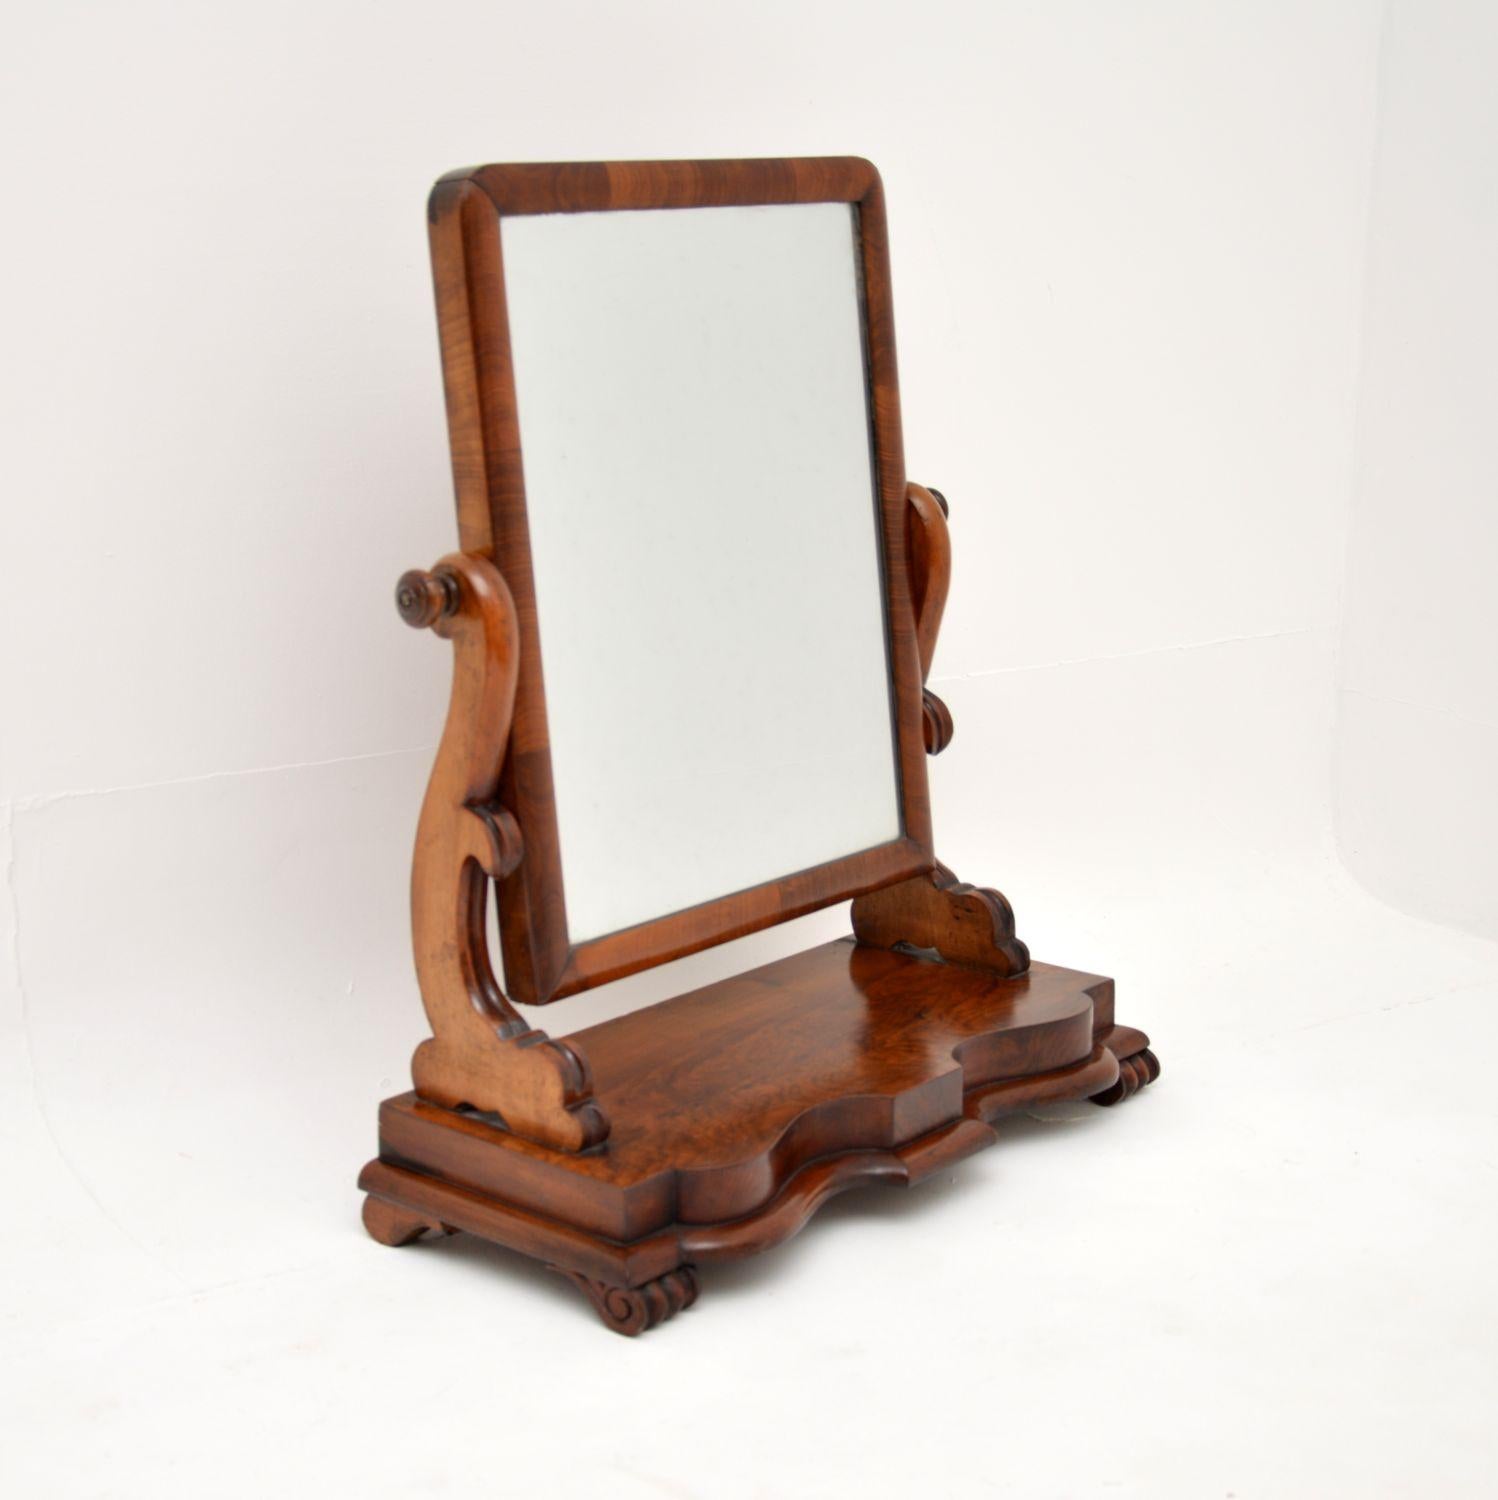 A wonderful antique Victorian walnut vanity mirror. This was made in England, it dates from around the 1860-1880 period.

This is really well made, it is a useful and versatile item. Designed to go on top of a dressing chest or in a toilet, this can